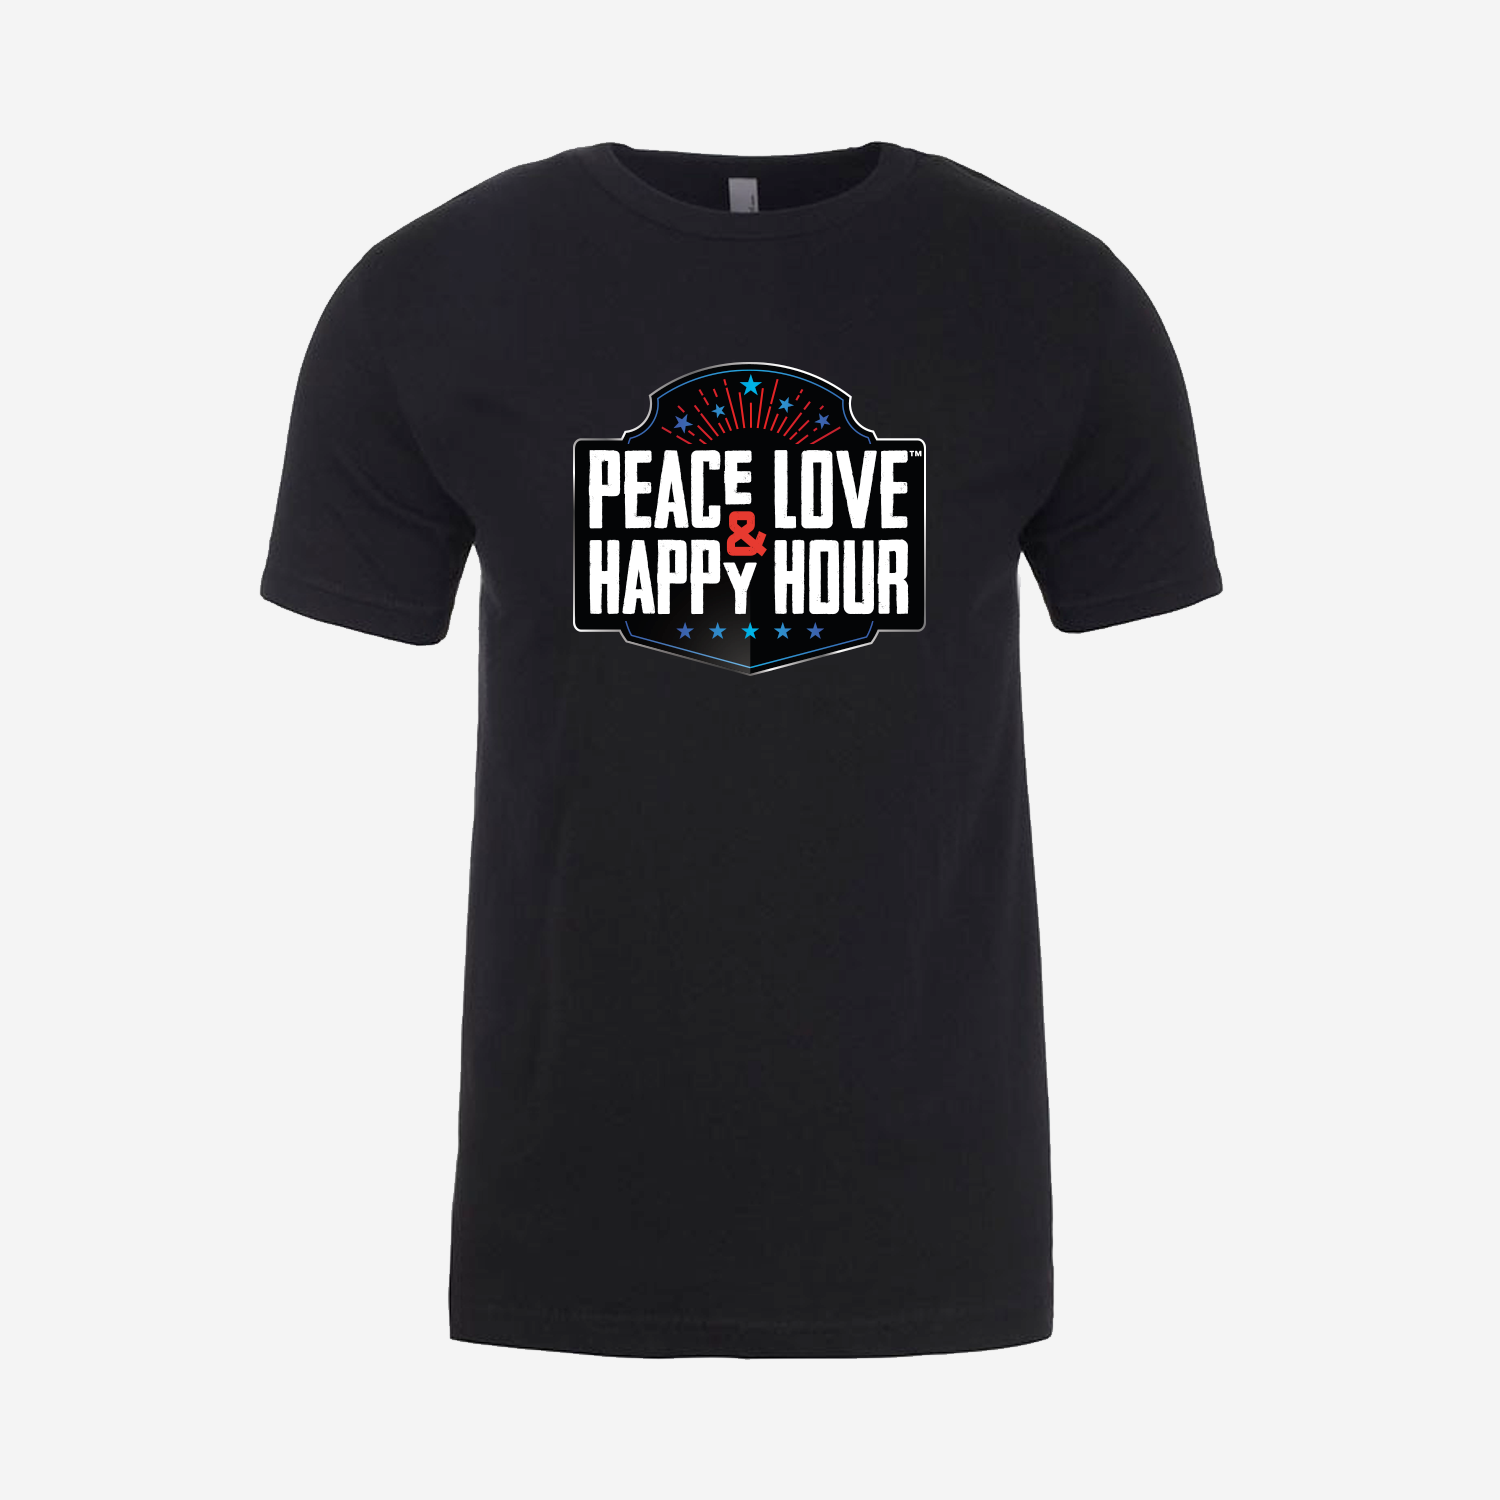 Peace Happy Hour Badlands – Love T-Shirt and